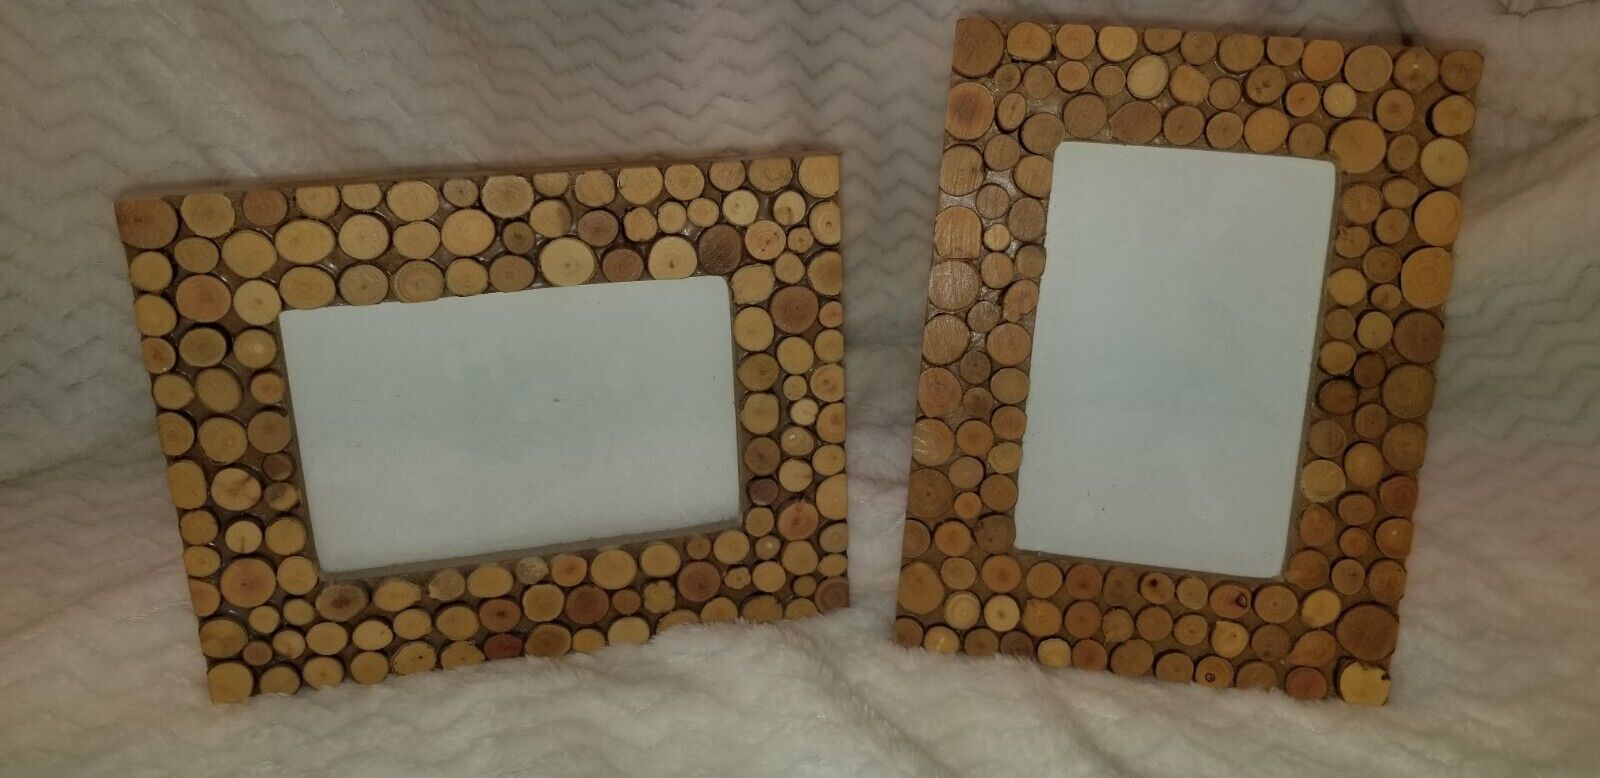 Rustic Picture Frames, Set of 2, 4x6, natural wood branches mountain cabin style